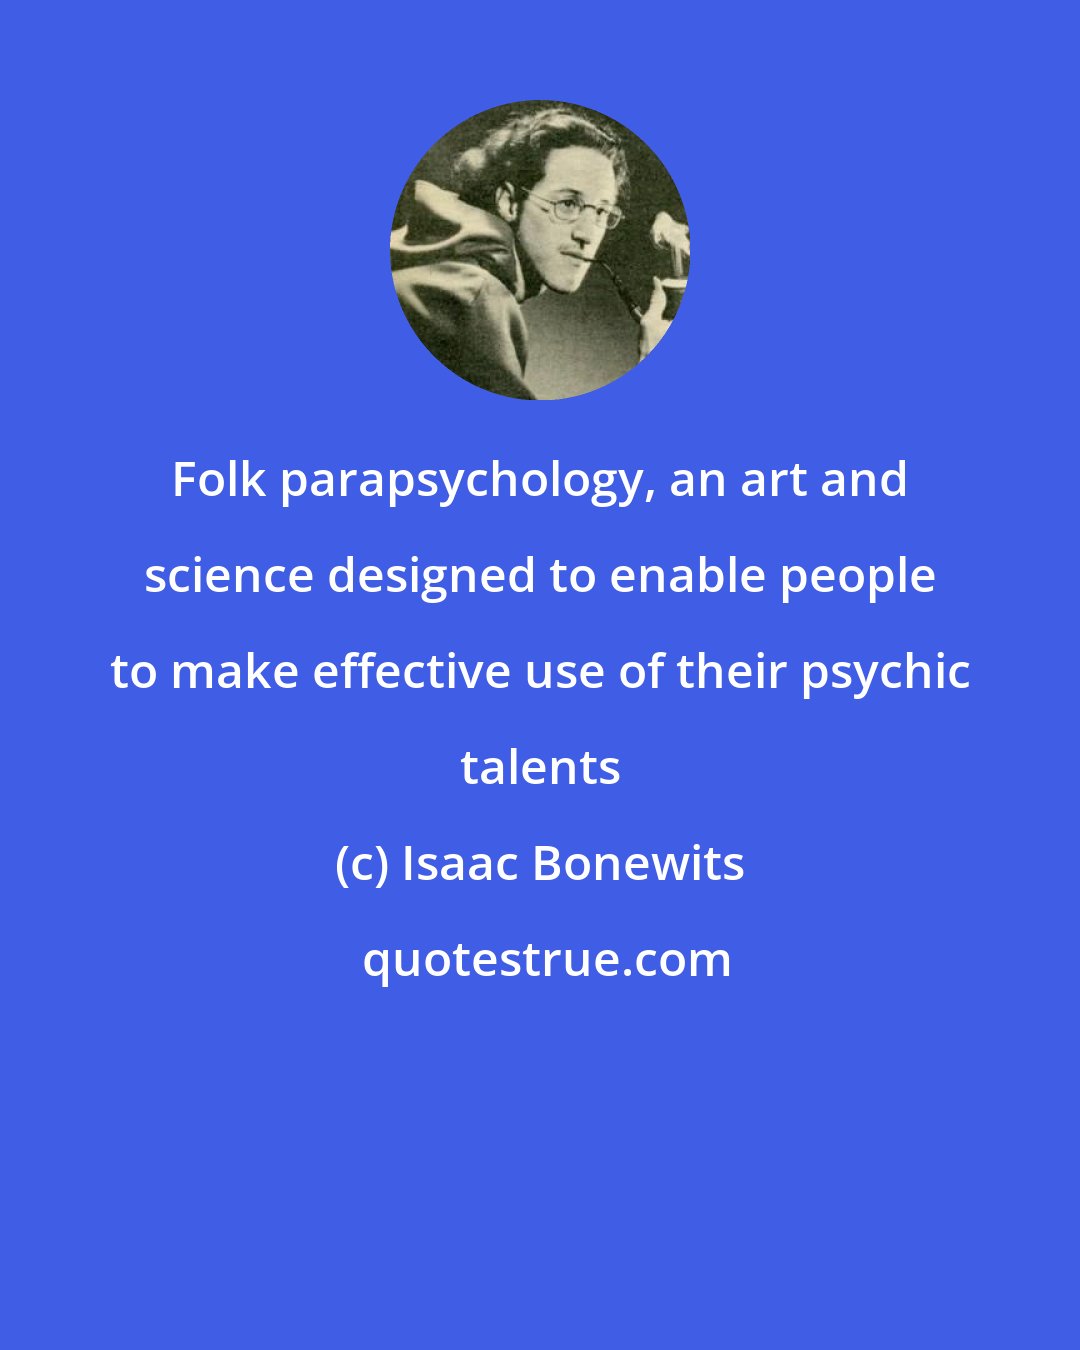 Isaac Bonewits: Folk parapsychology, an art and science designed to enable people to make effective use of their psychic talents